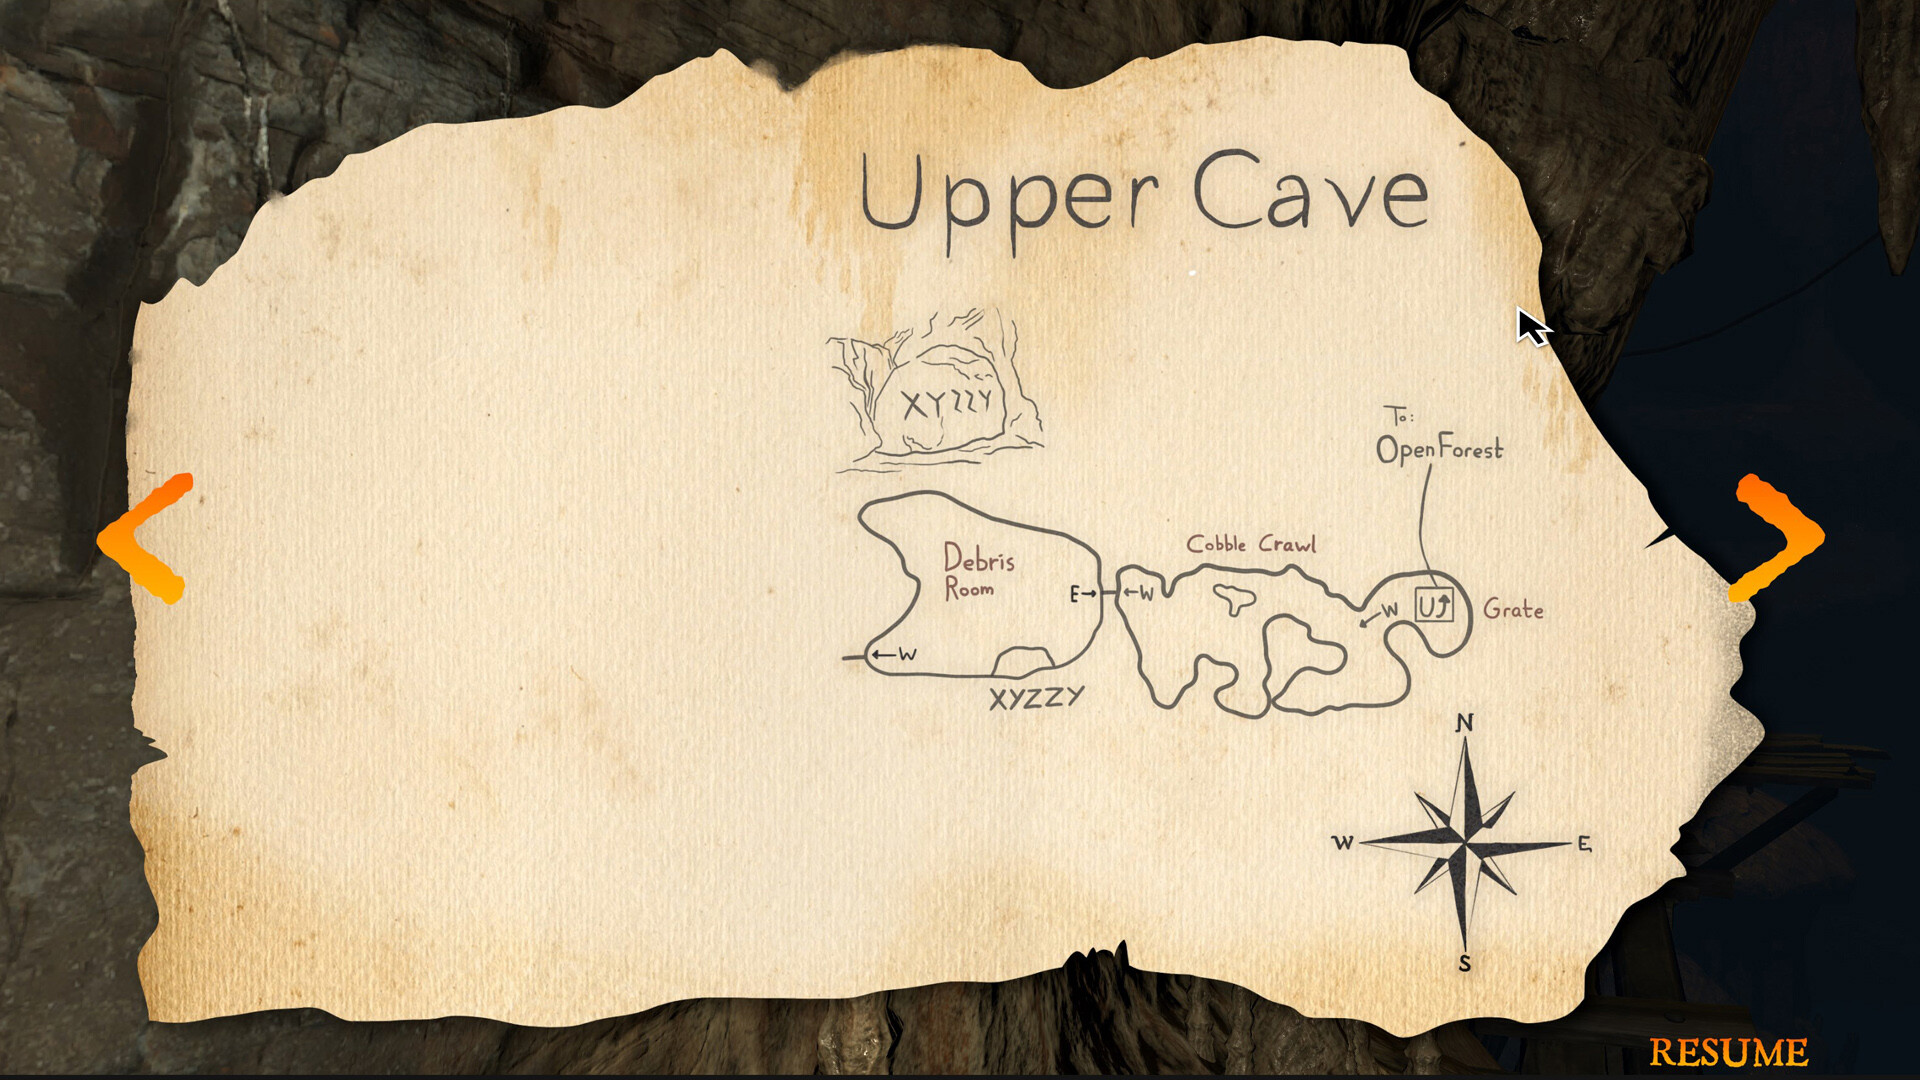 Colossal Cave interview: An in-game, hand-drawn map on a scrap of paper shows connected areas of a cave system, with labels that read Upper Cave, Cobble Crawl, and Debris Room.